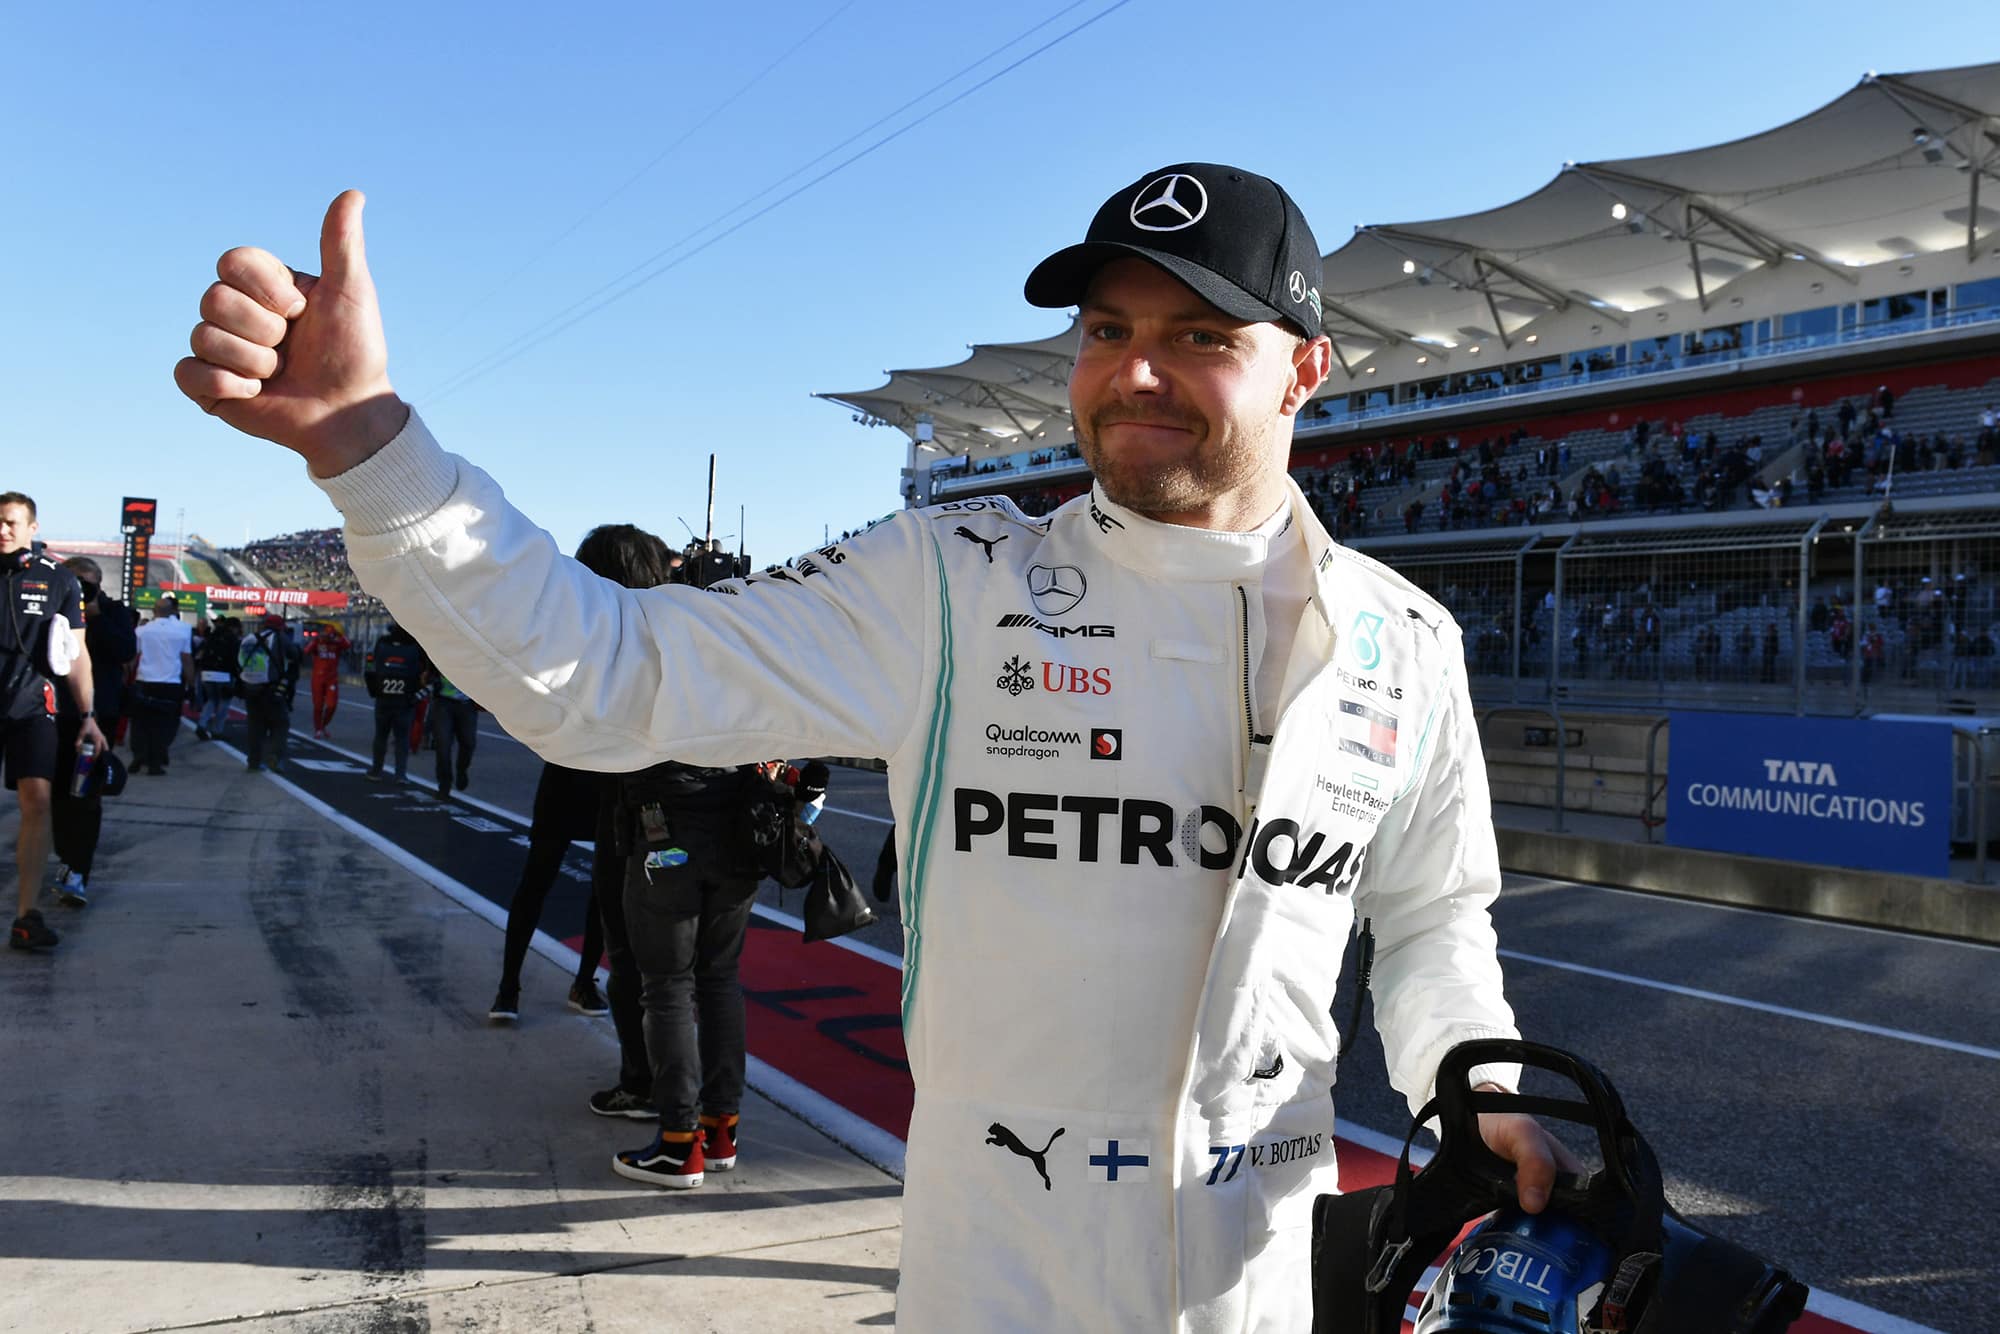 Valtteri Bottas gives the thumbs up after qualifying on pole for the 2019 US Grand Prix